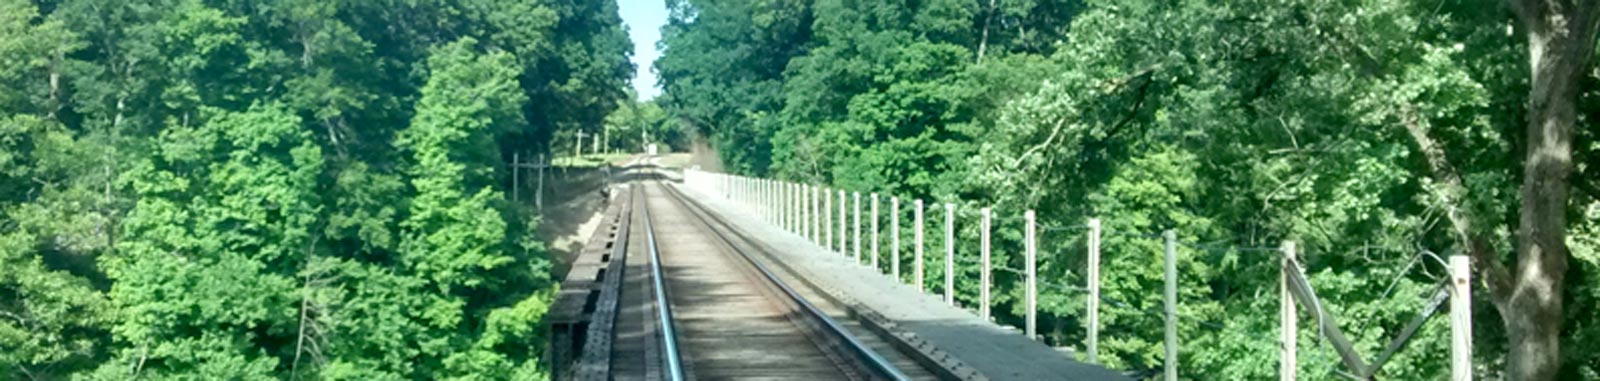 Railway tracks in a heavily forested area.